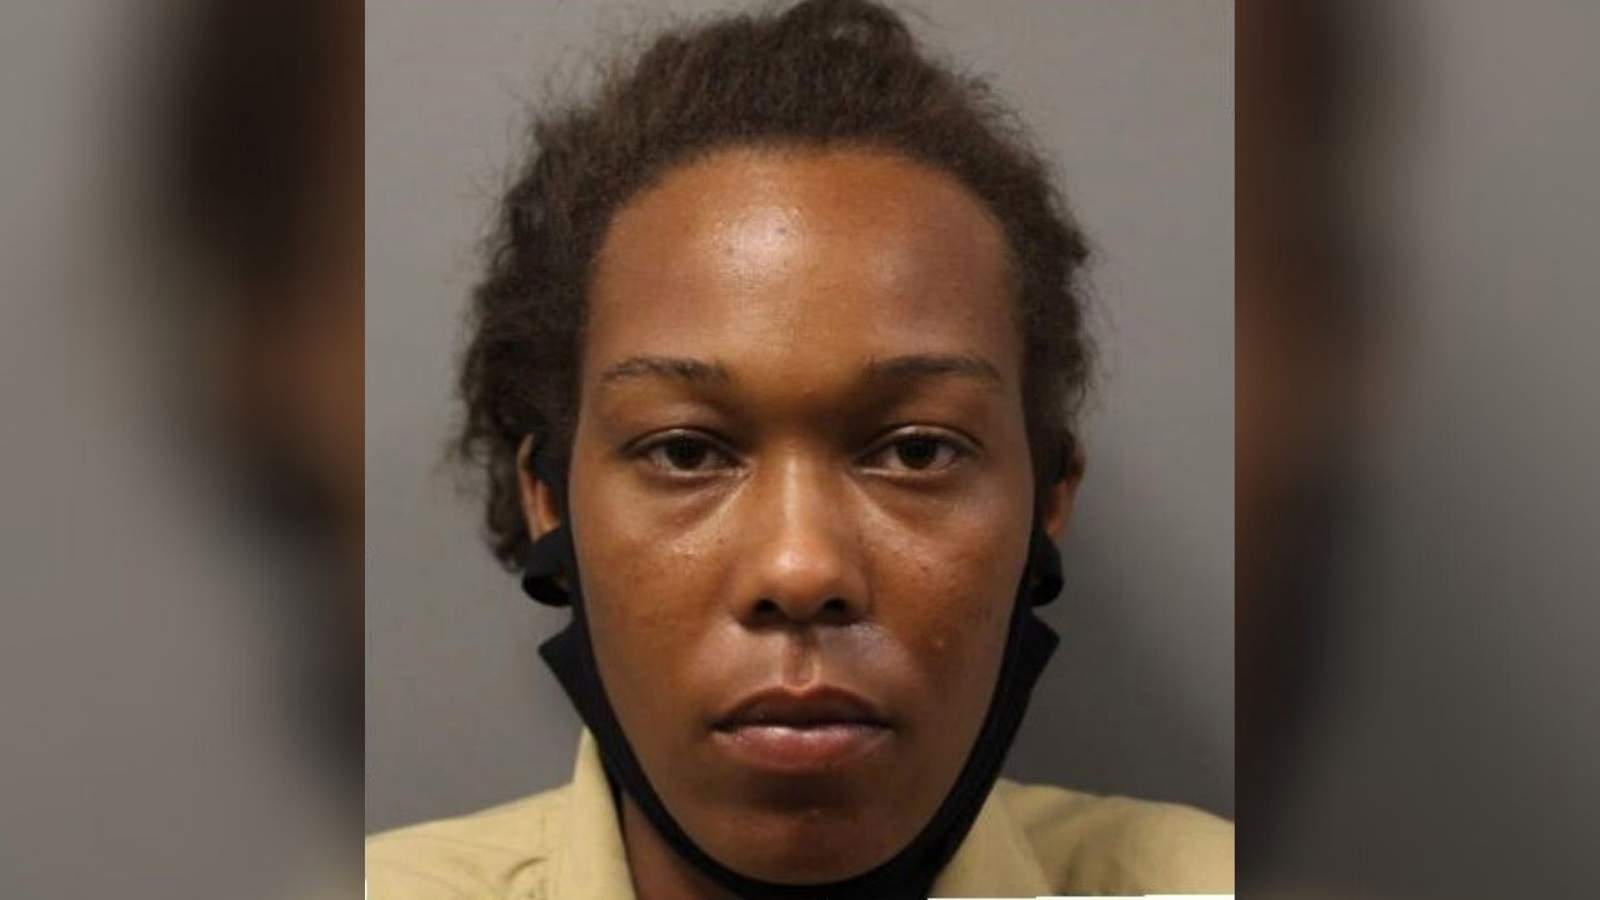 Mom starved toddler, then put her body in dumpster, police say